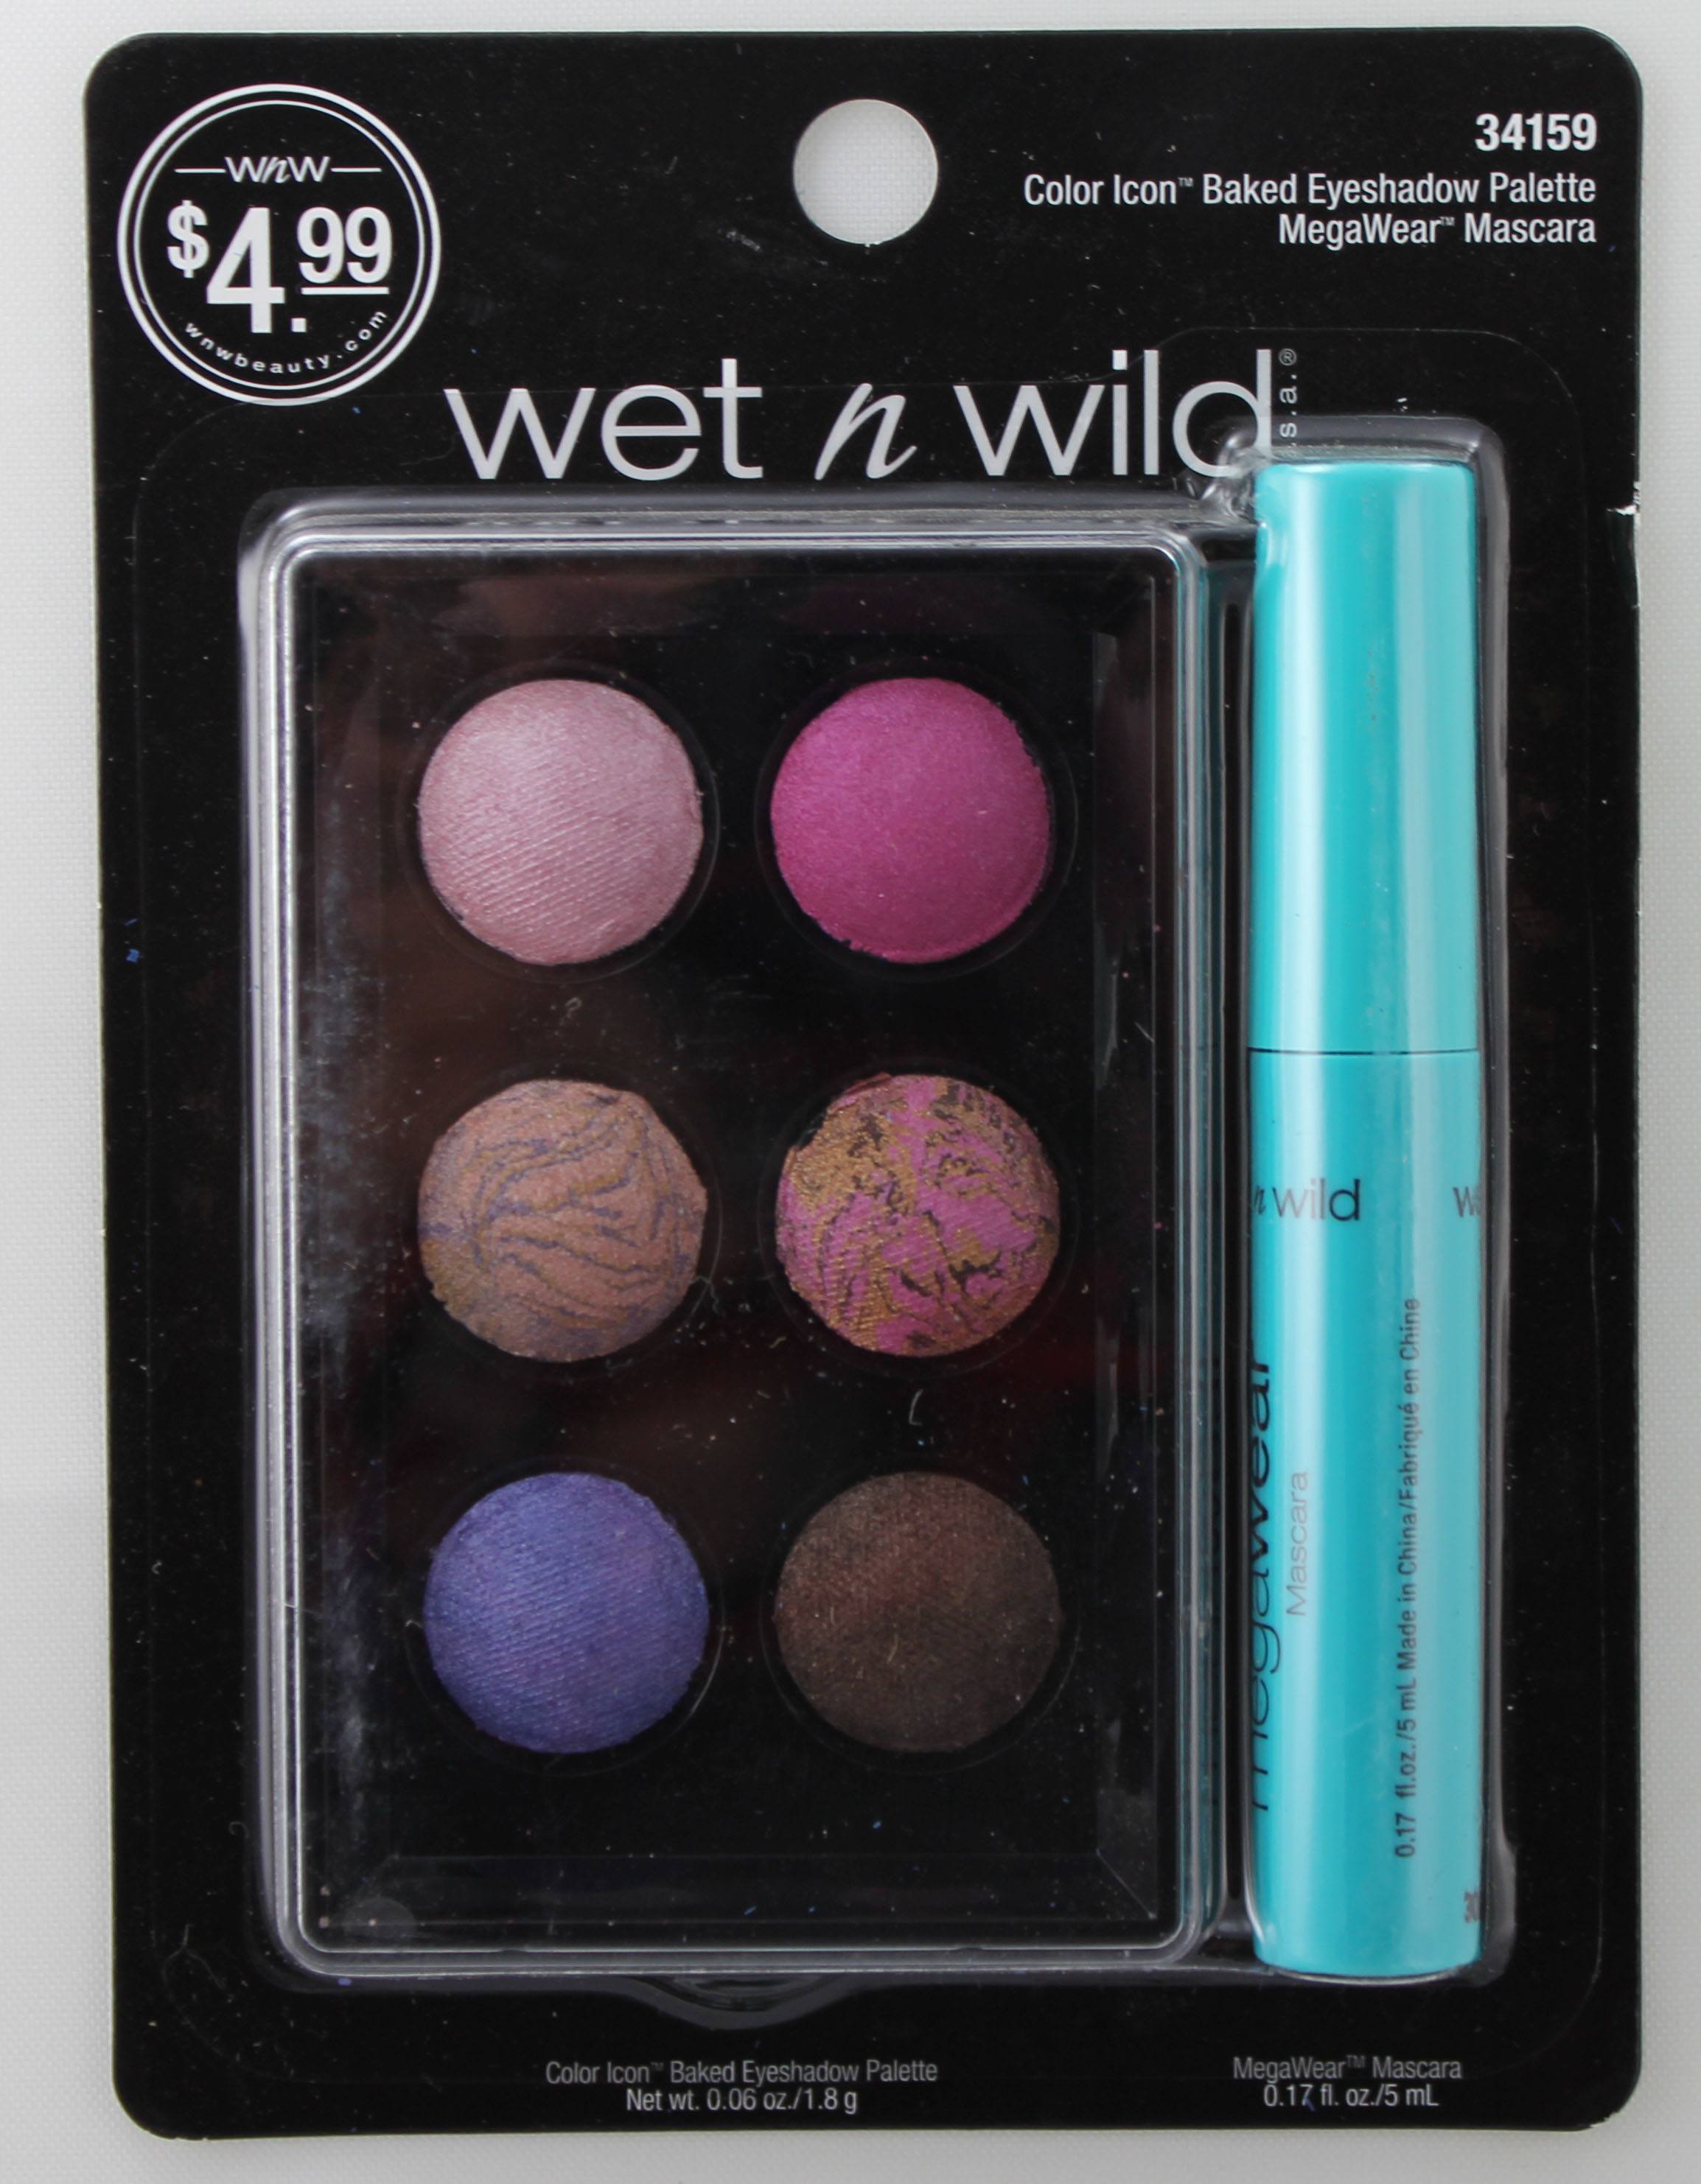 Wet N Wild Color Icon Pan Baked Eyeshadow Palette & MegaWear Mascara - Click Image to Close